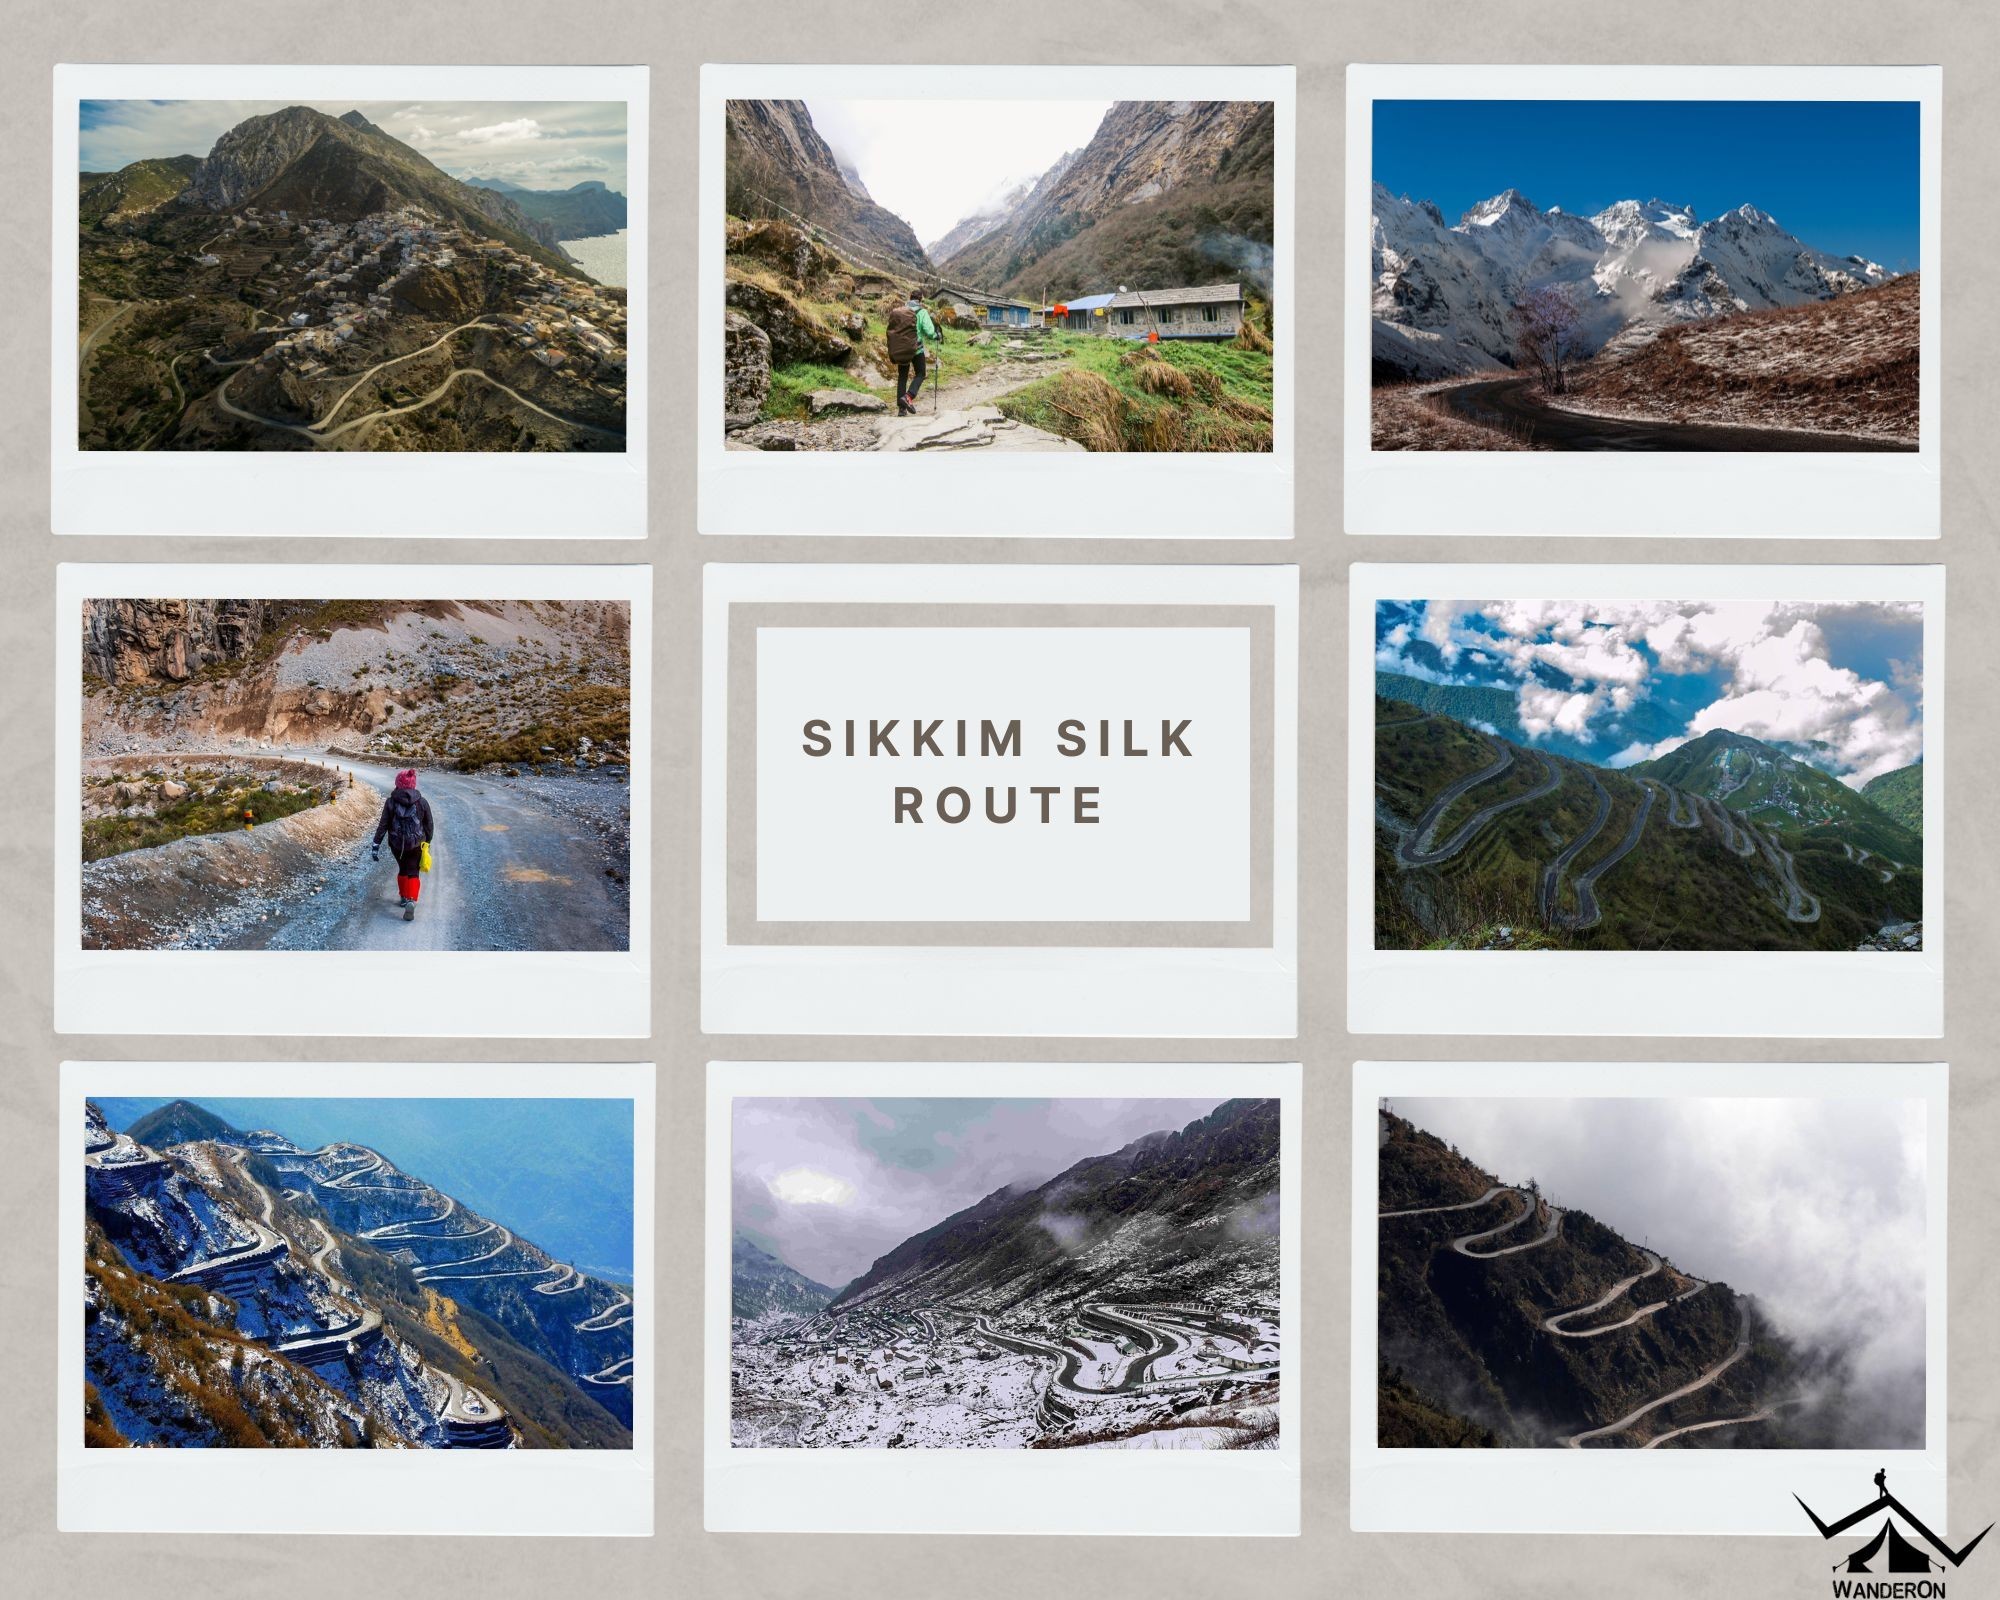 Journey Through Time: Exploring the Sikkim Silk Route